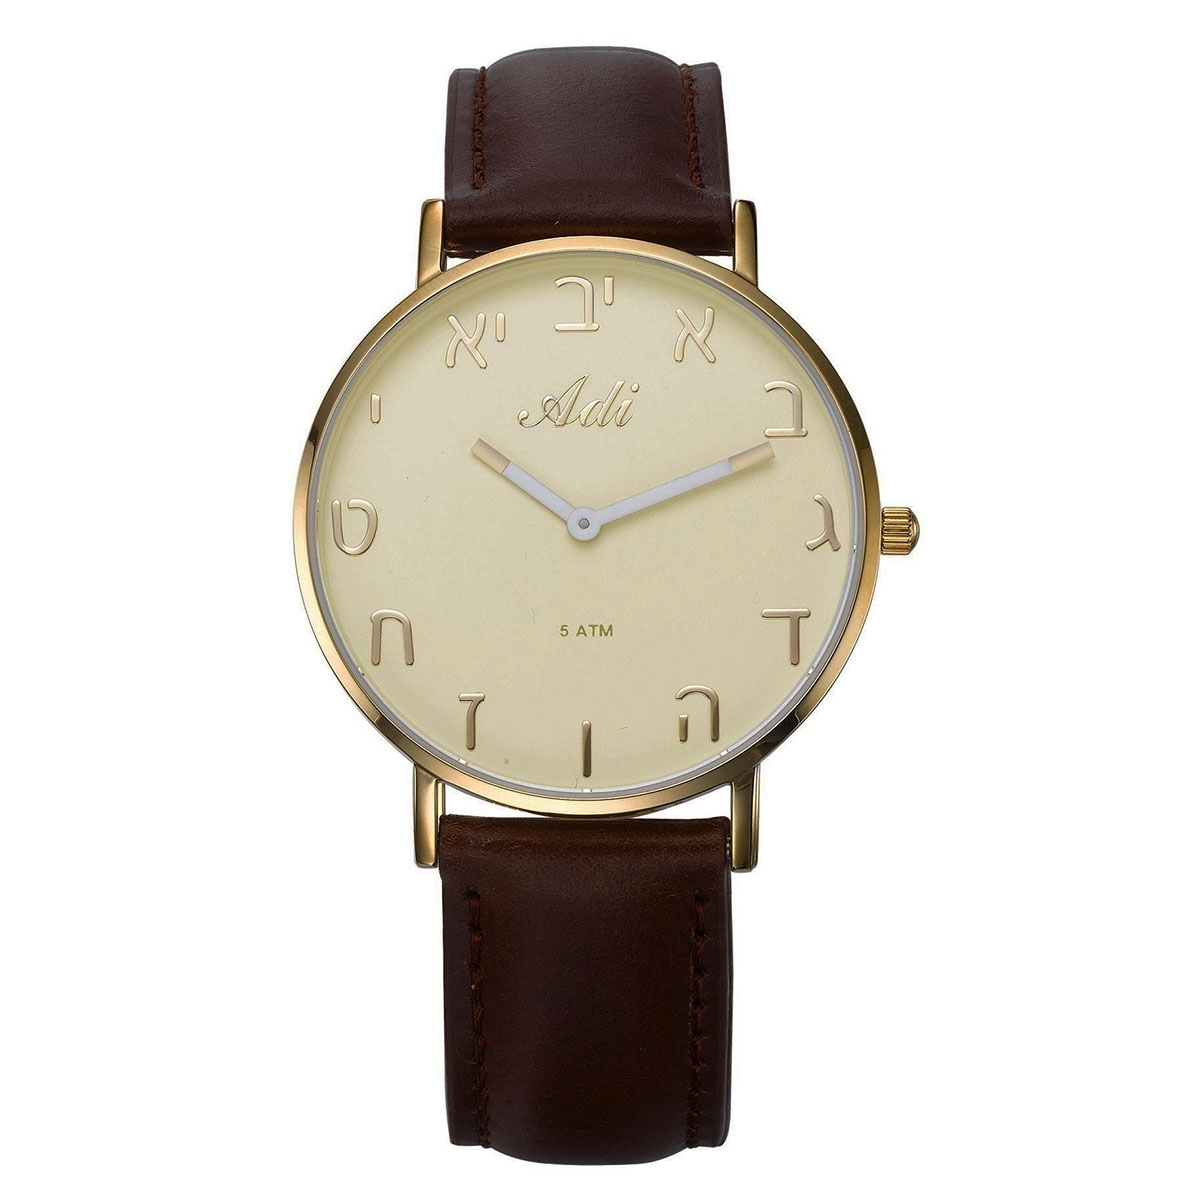 Adi Brown Leather Aleph-Bet Watch - Cream and Gold Face - 1